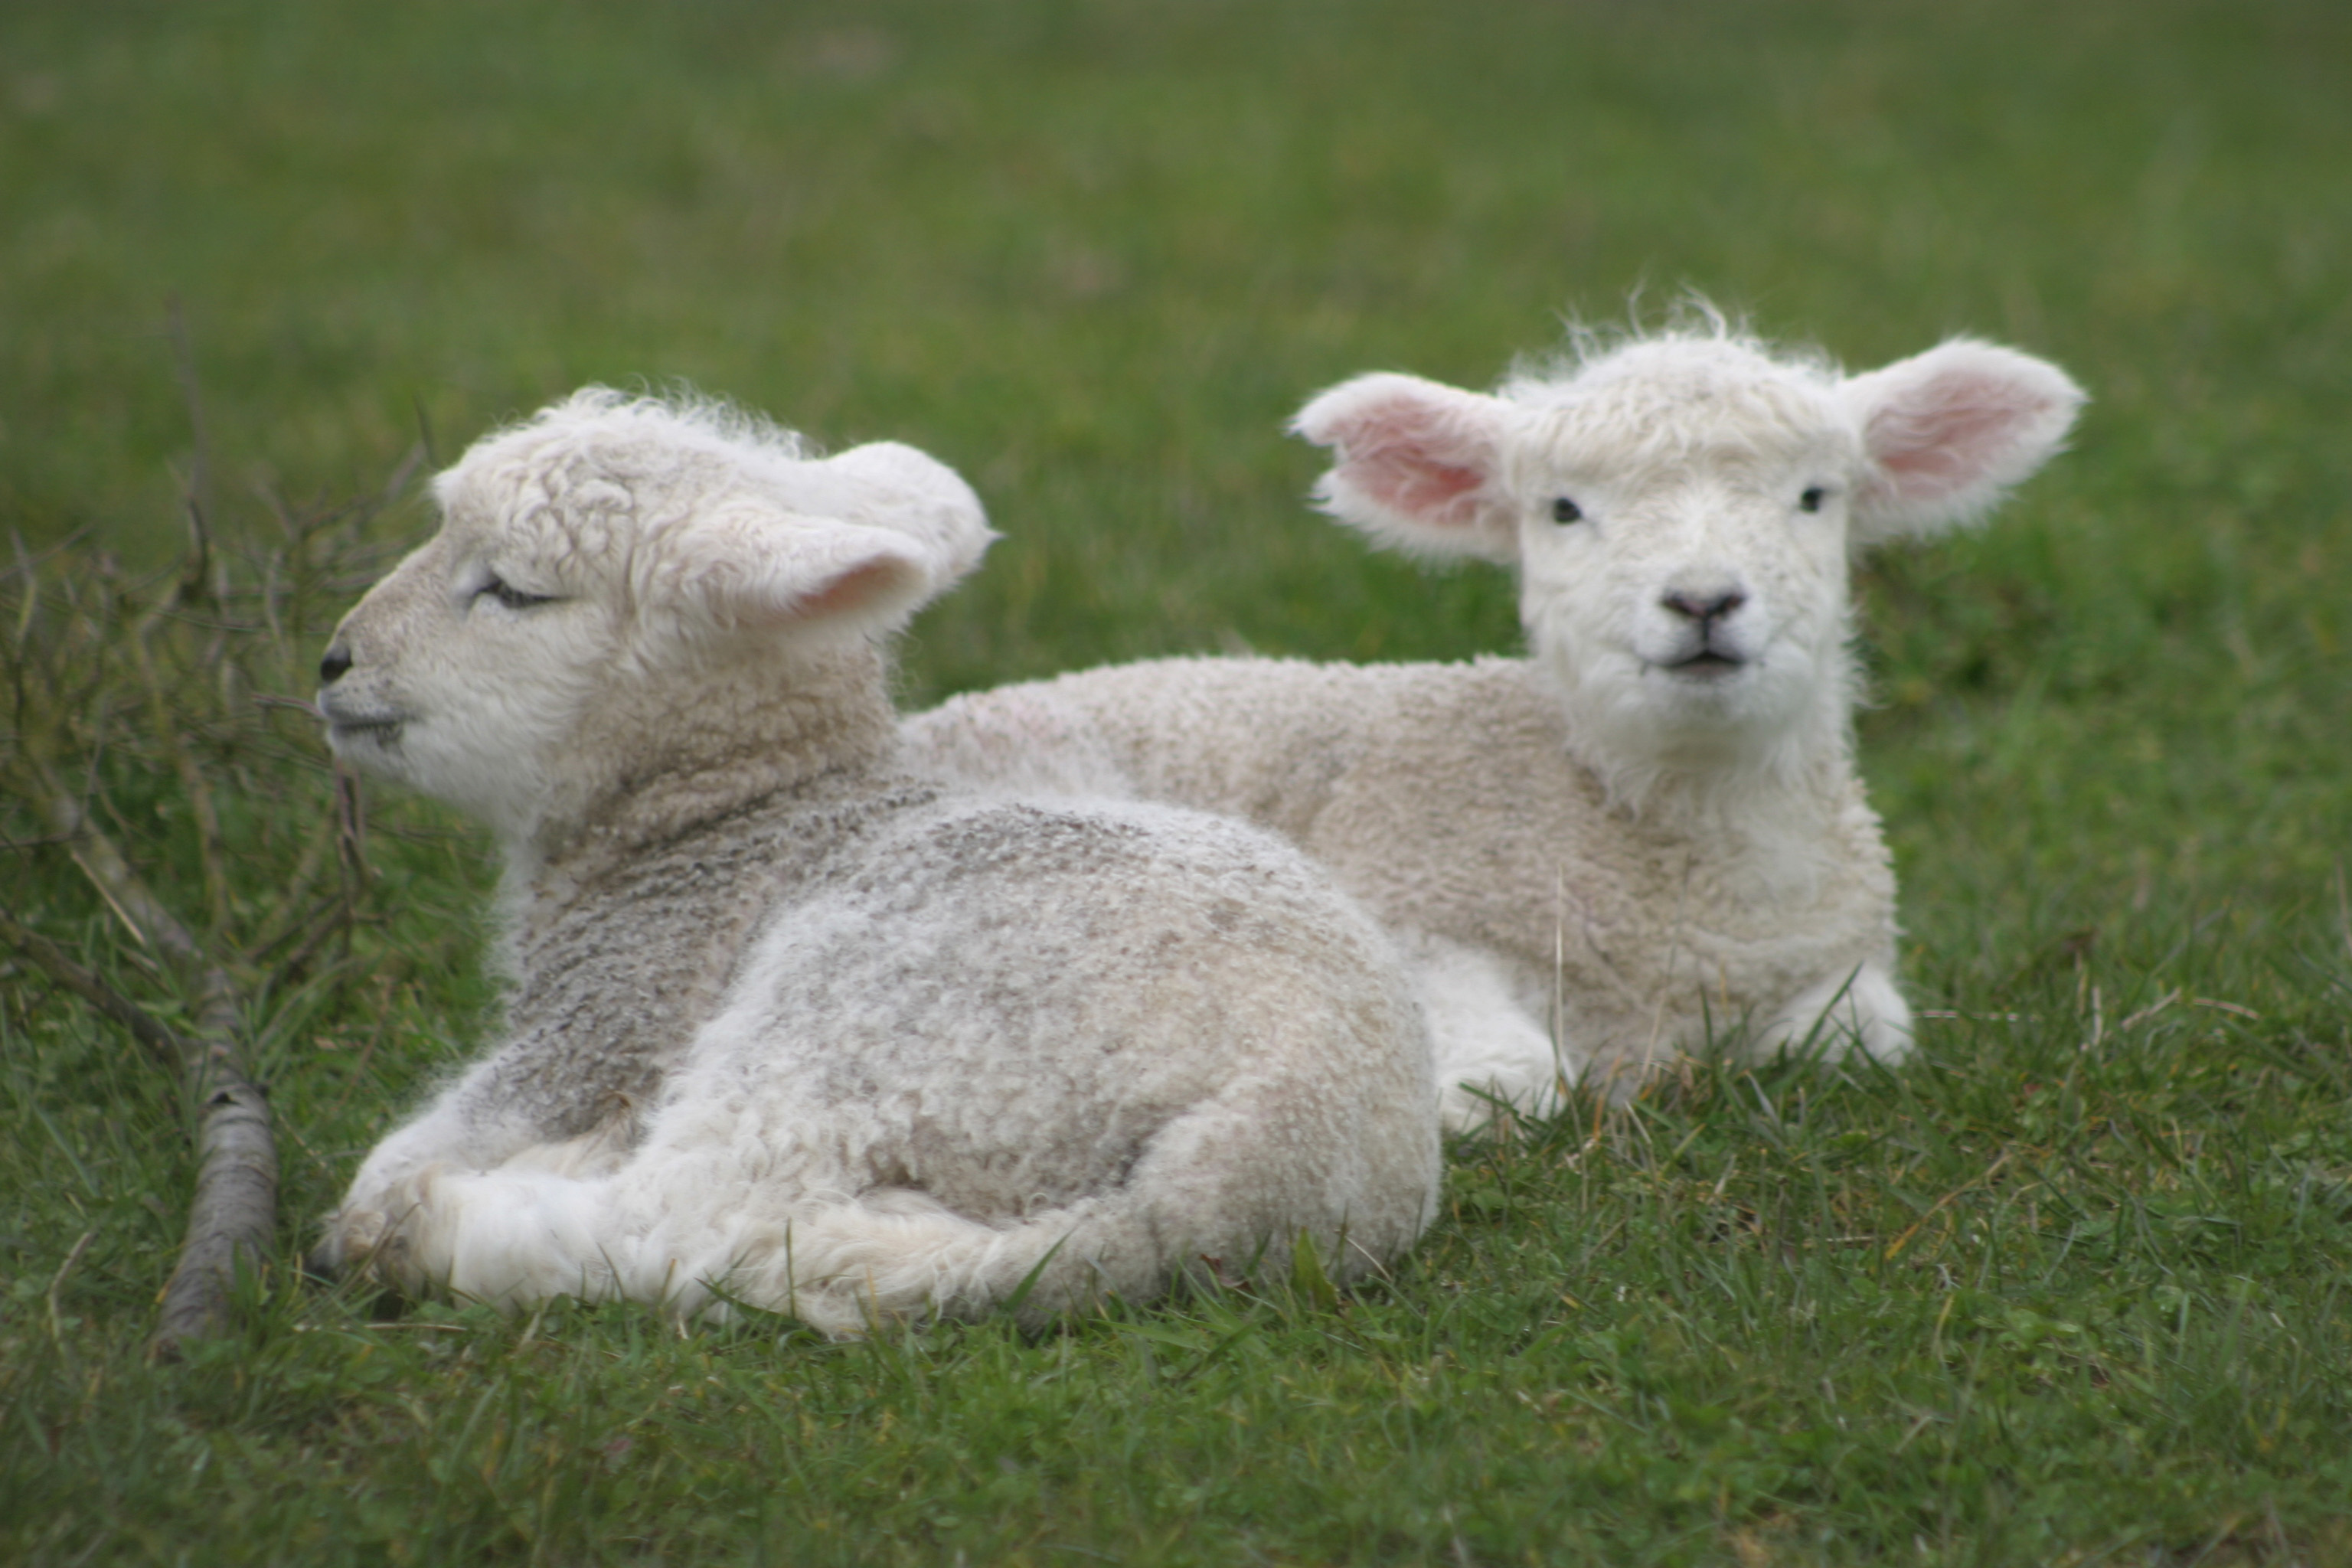 photograph of lambs relaxing